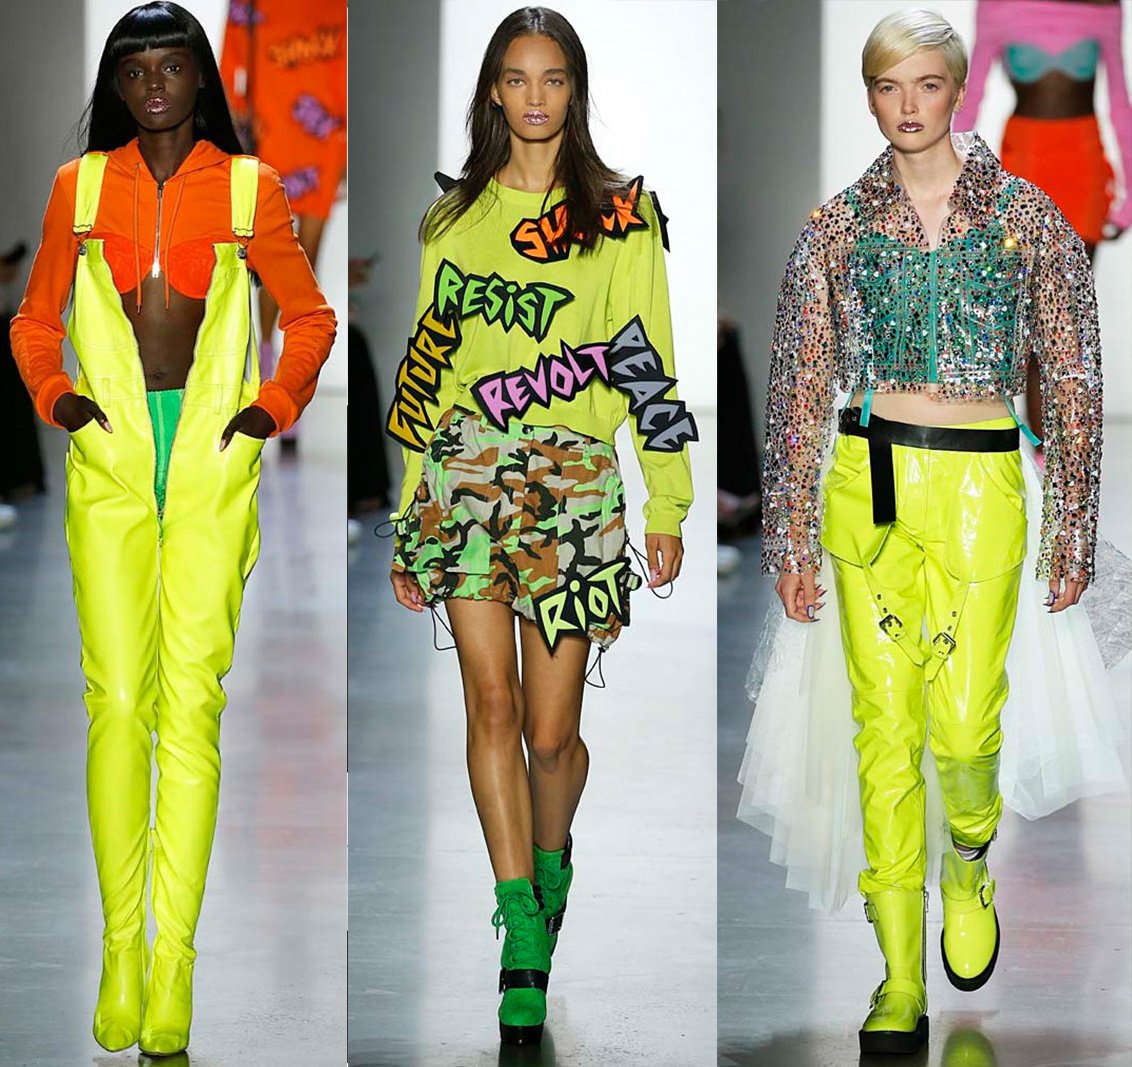 2019 top fashion trends - neon